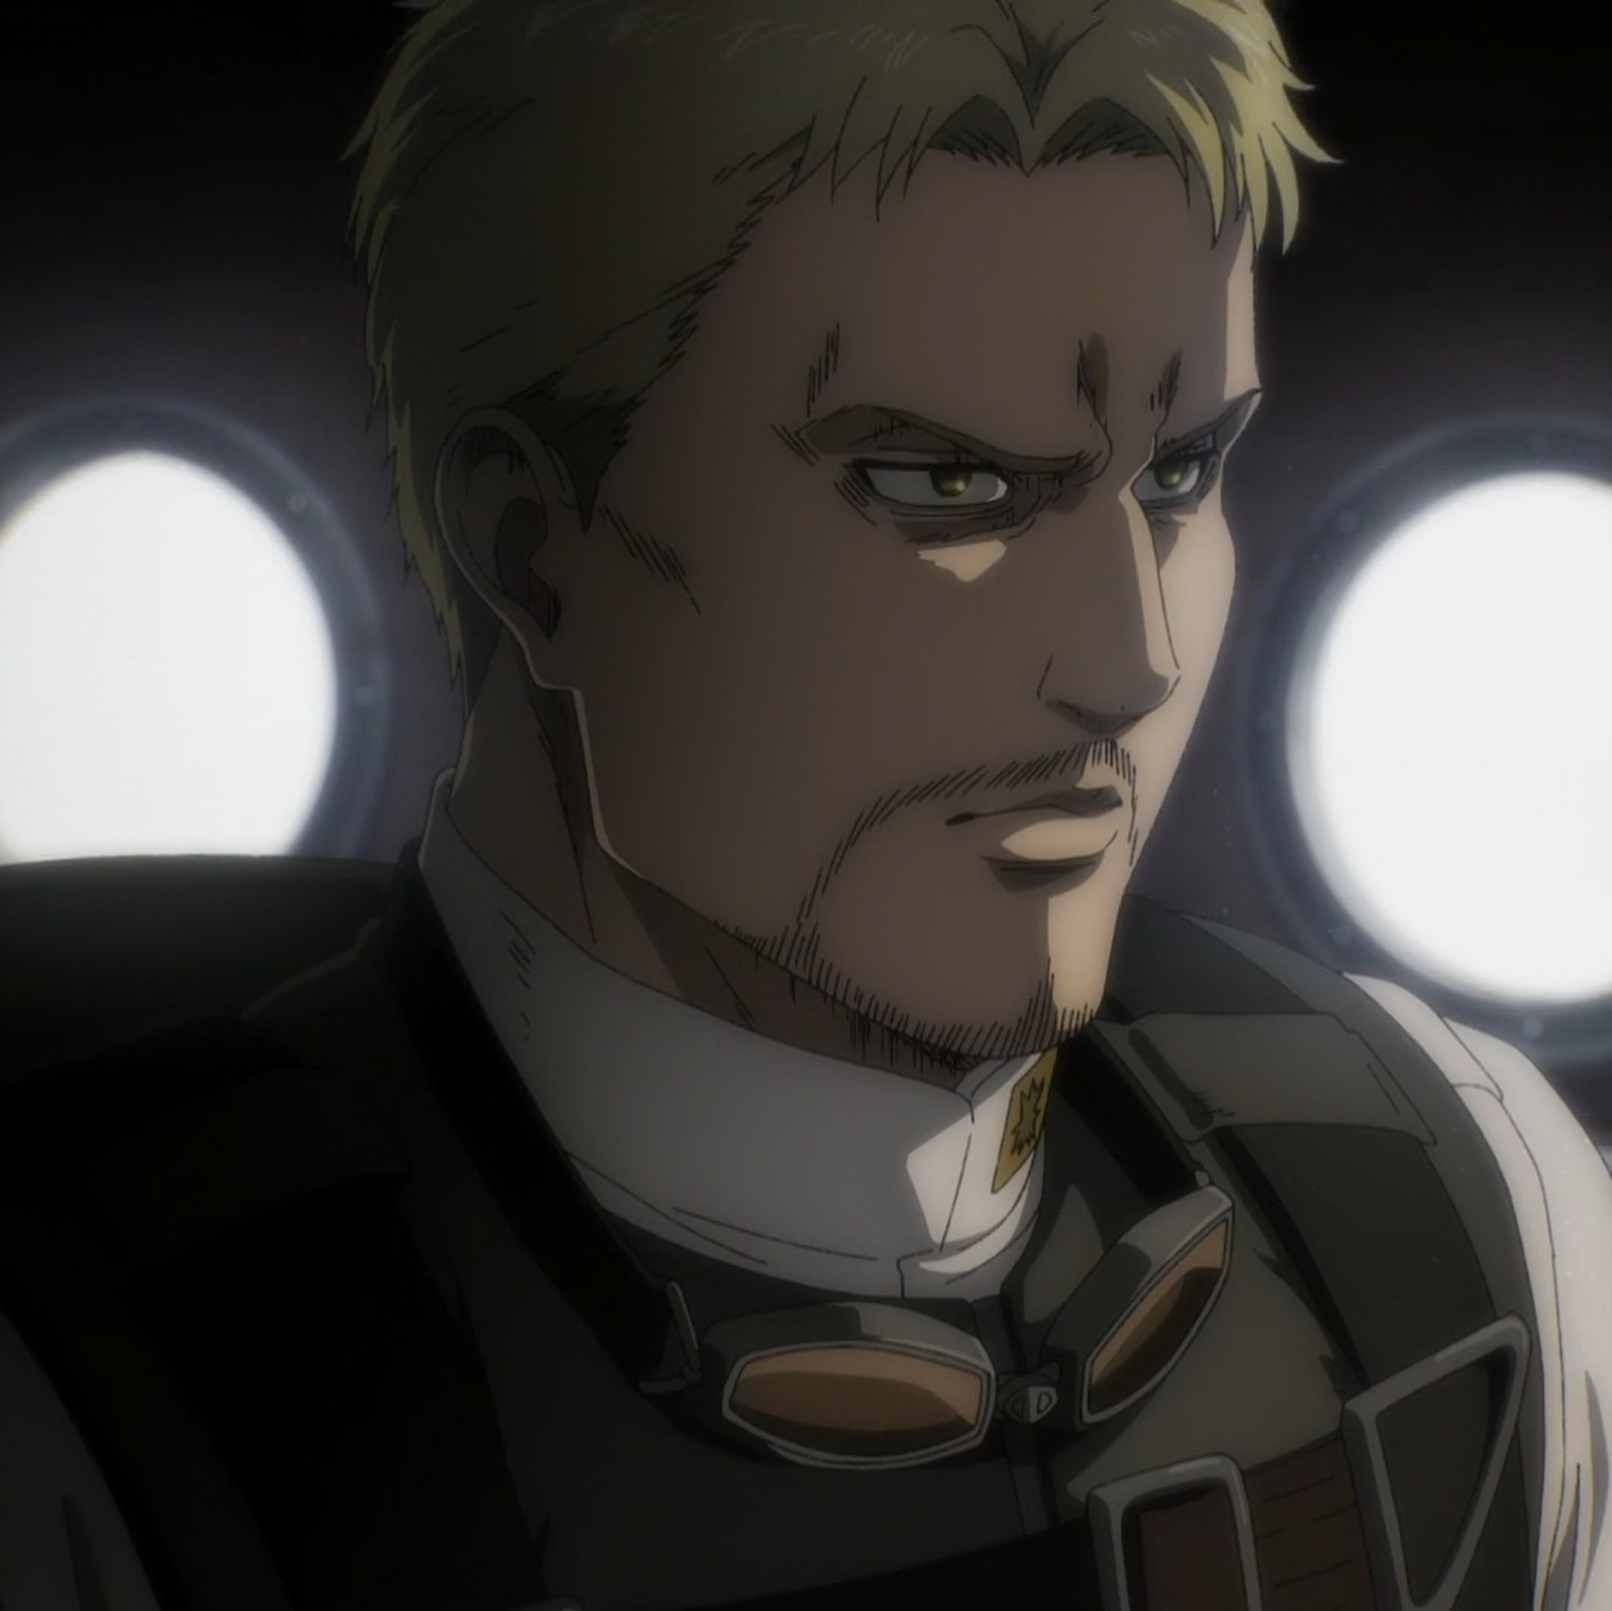 https://static.wikia.nocookie.net/villains/images/6/65/Reiner_inside_airship.png/revision/latest?cb=20230203005802